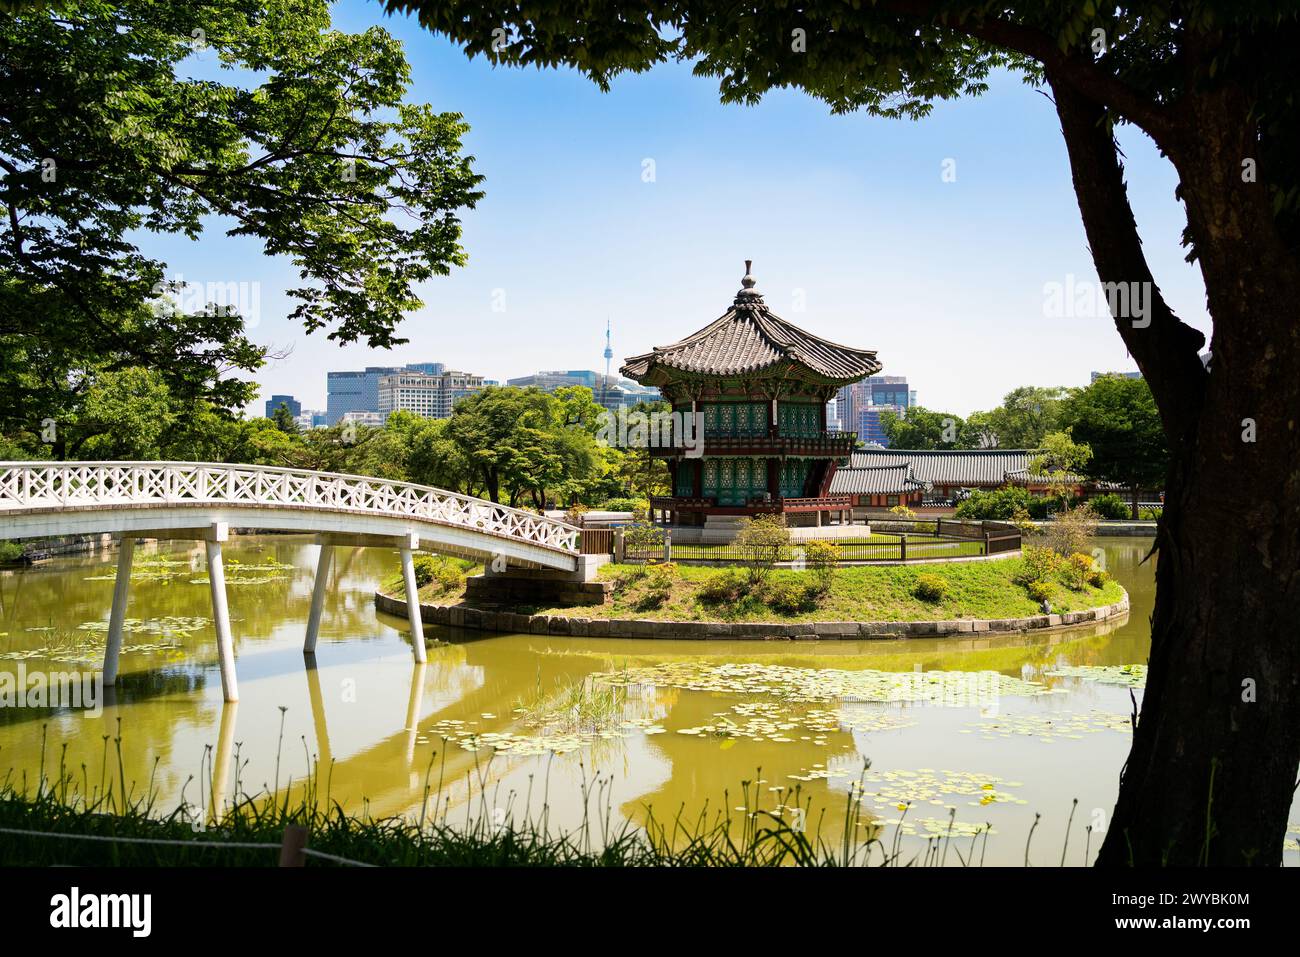 South Korea, Seoul. Gyeongbokgung palace area garden and park. Hyangwonjeong pavilion and bridge. City skyline in the background. Summer travel. Stock Photo